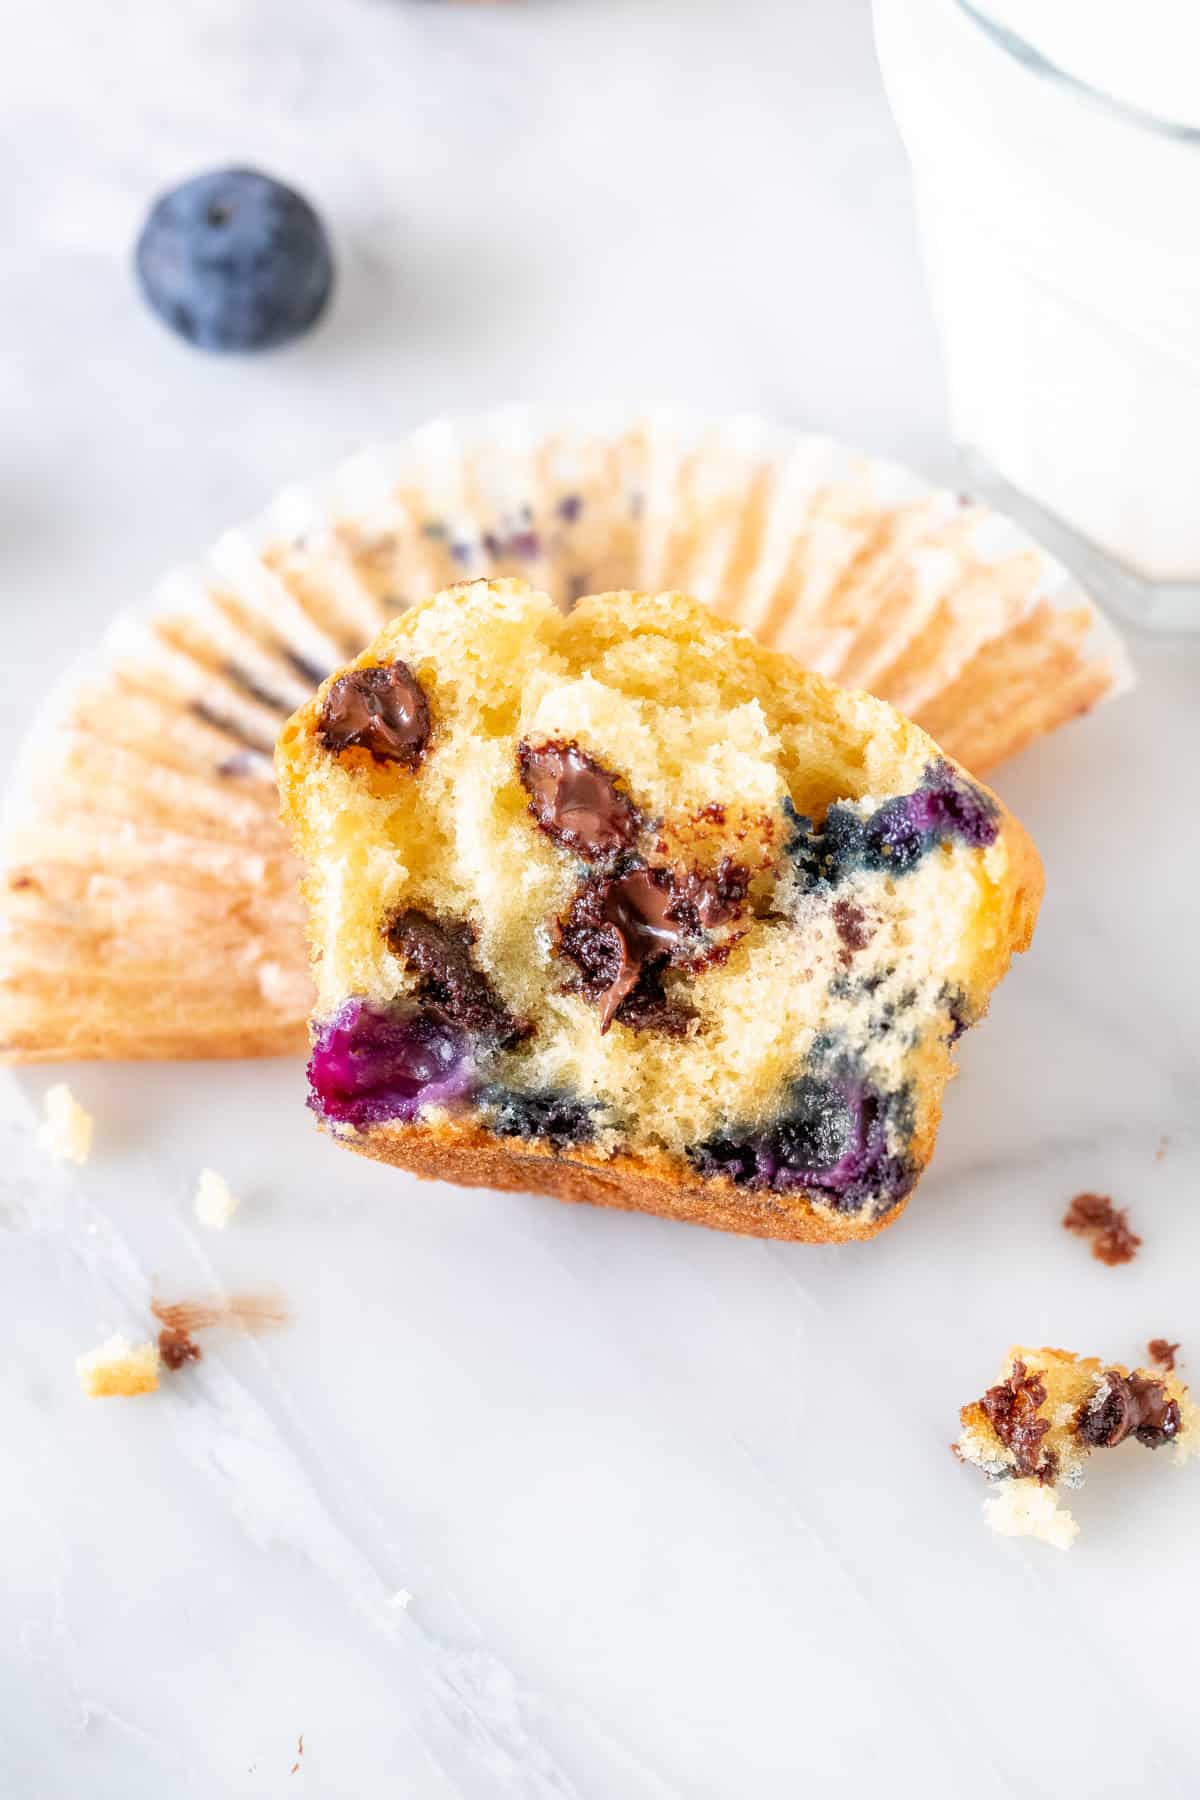 Half of a blueberry chocolate chip muffin.